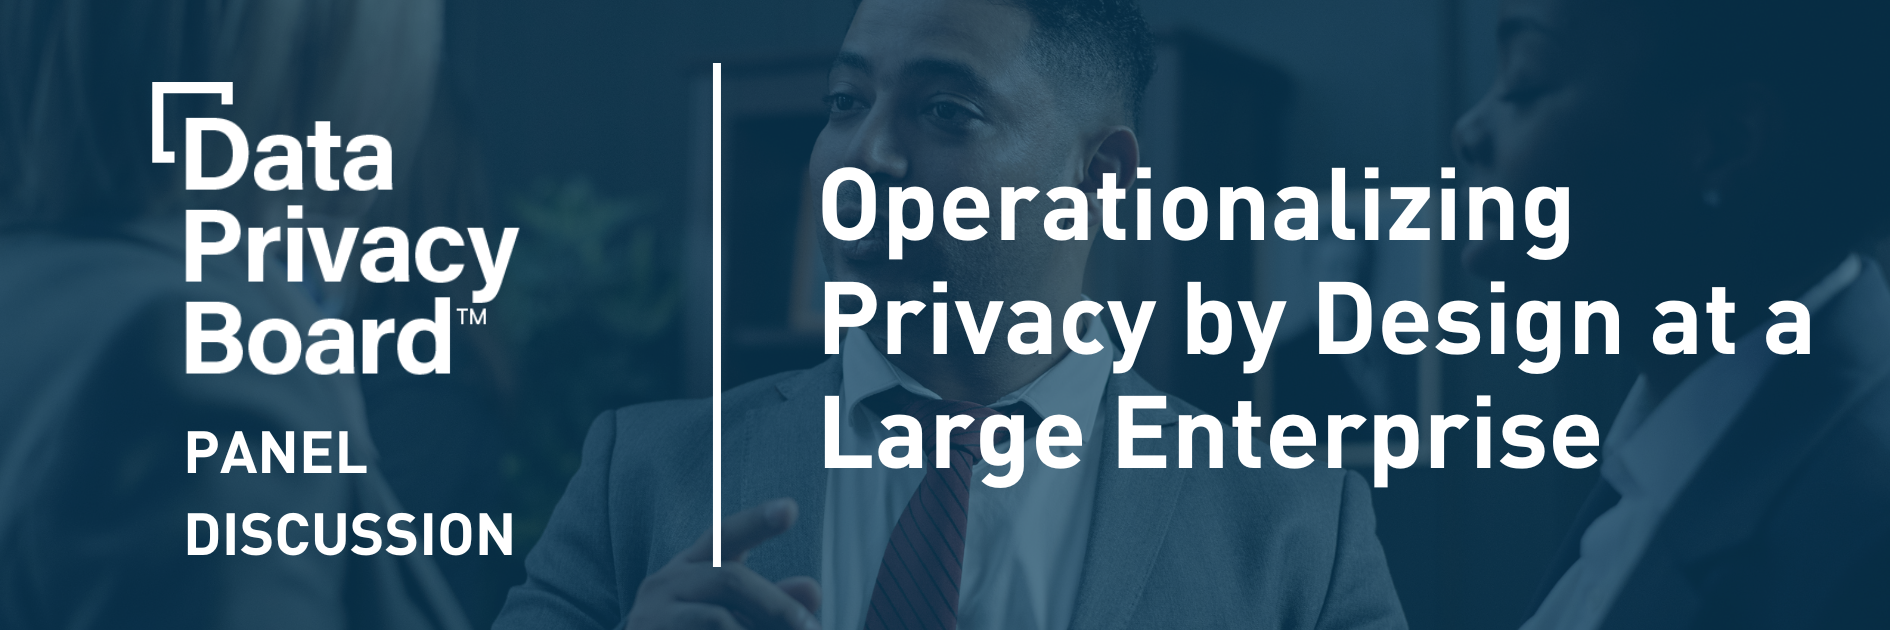 Panel on Operationalizing Privacy by Design at a Large Enterprise